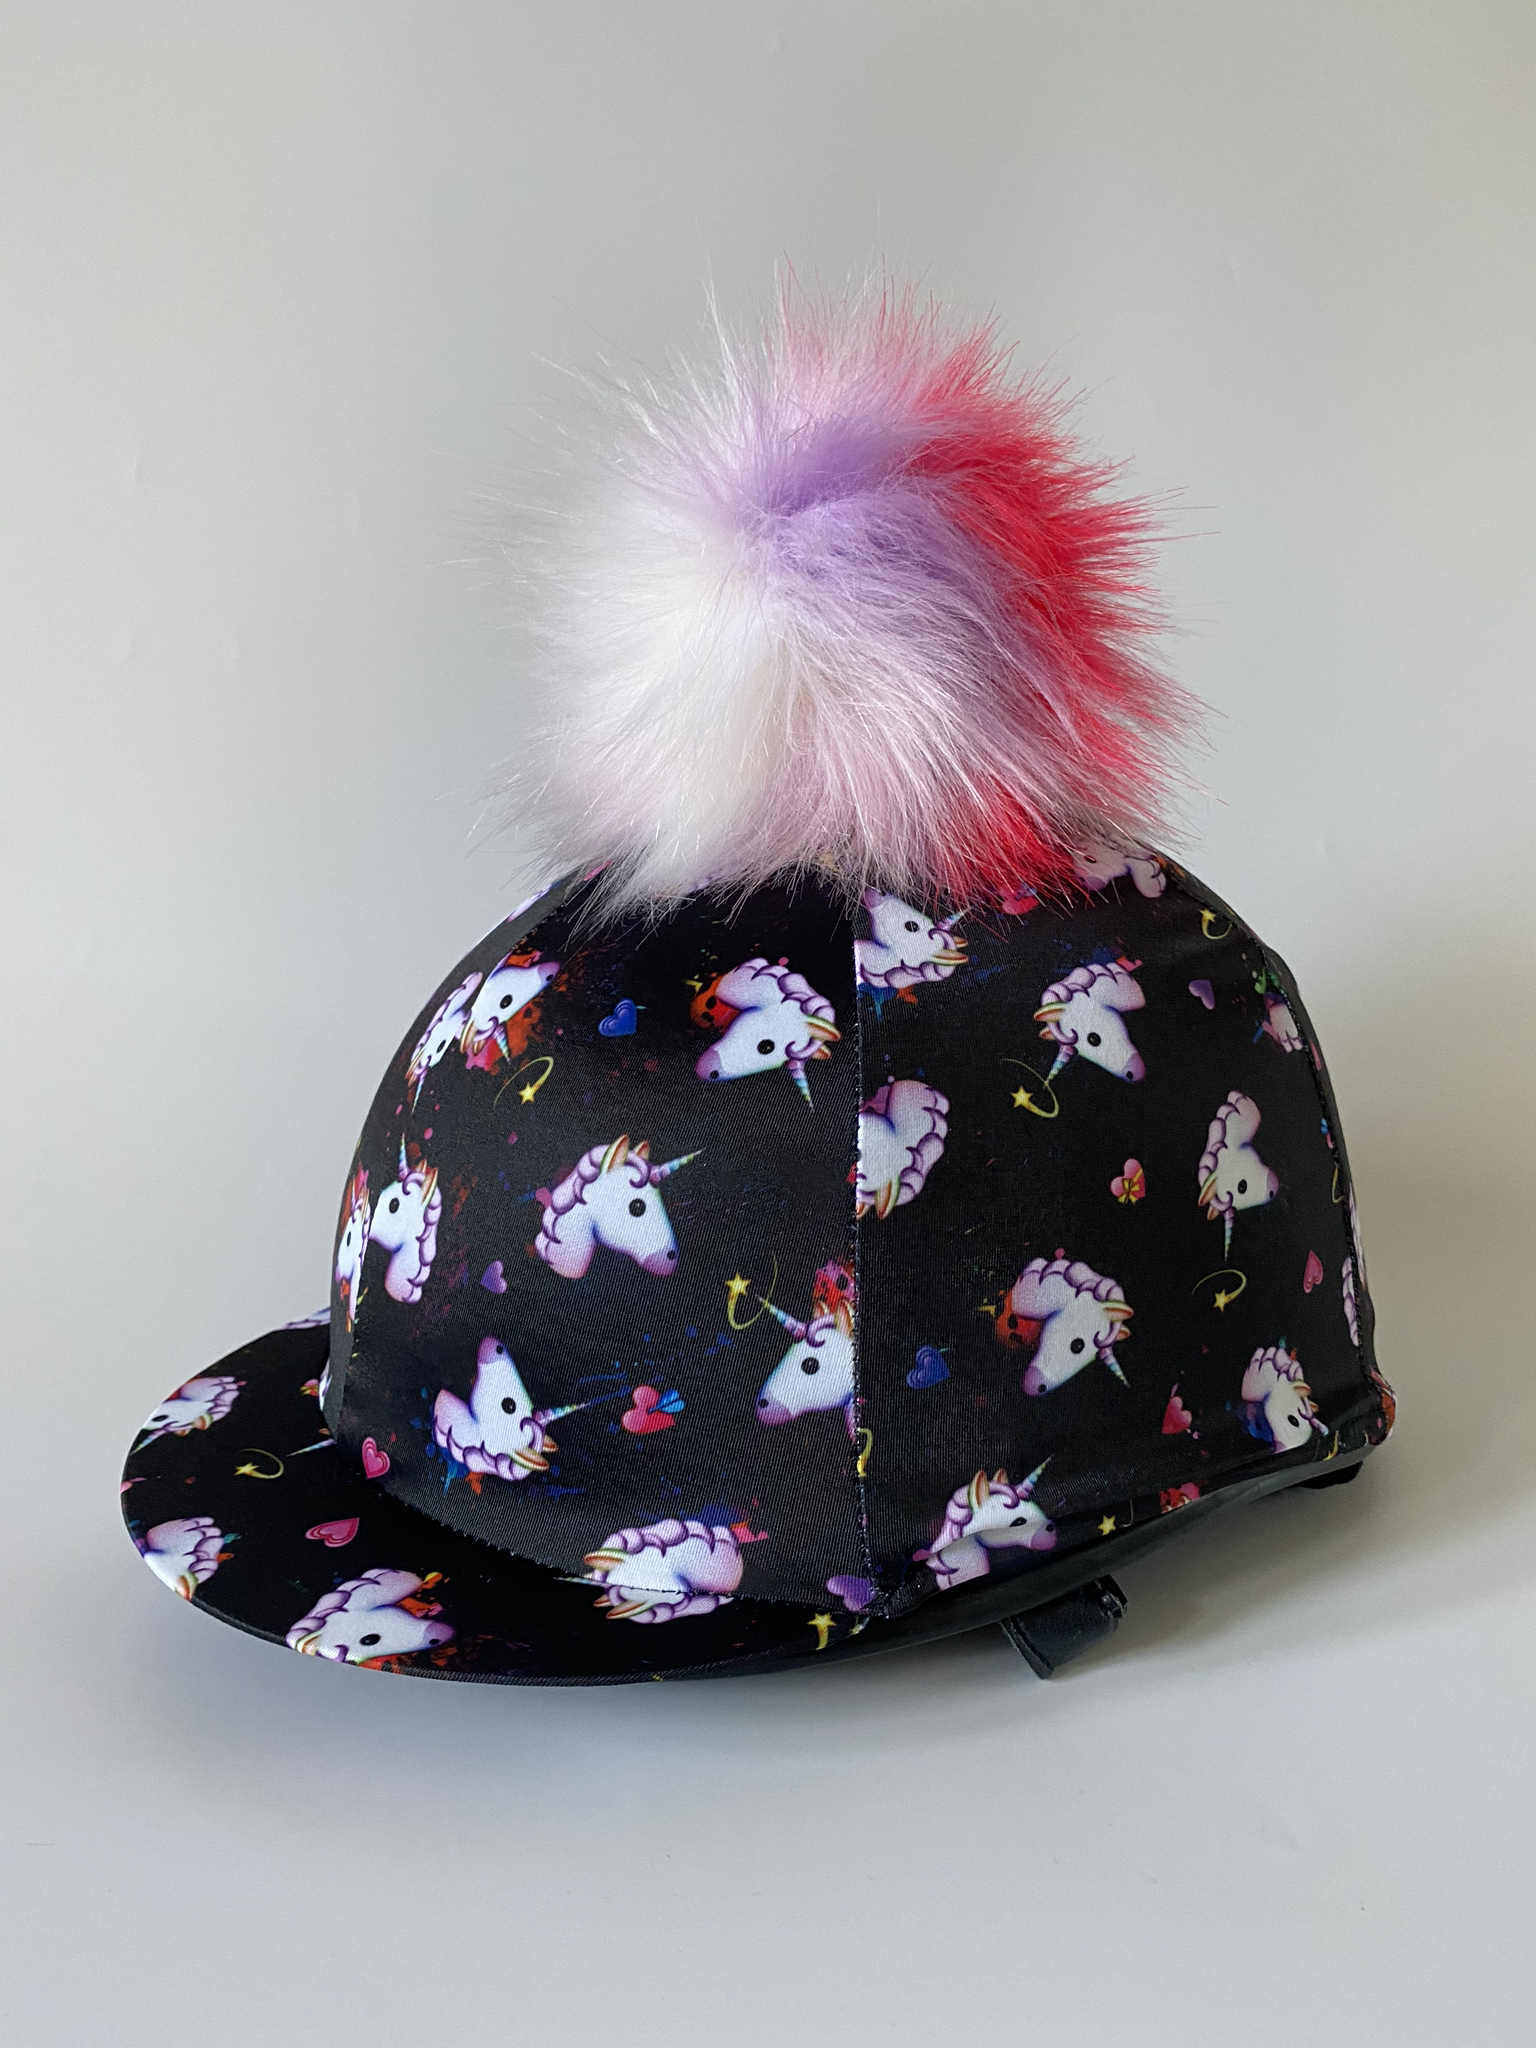 Hat Silk Skull cap Cover PURPLE & HOT CERISE PINK With OR w/o Pompom HEARTS 